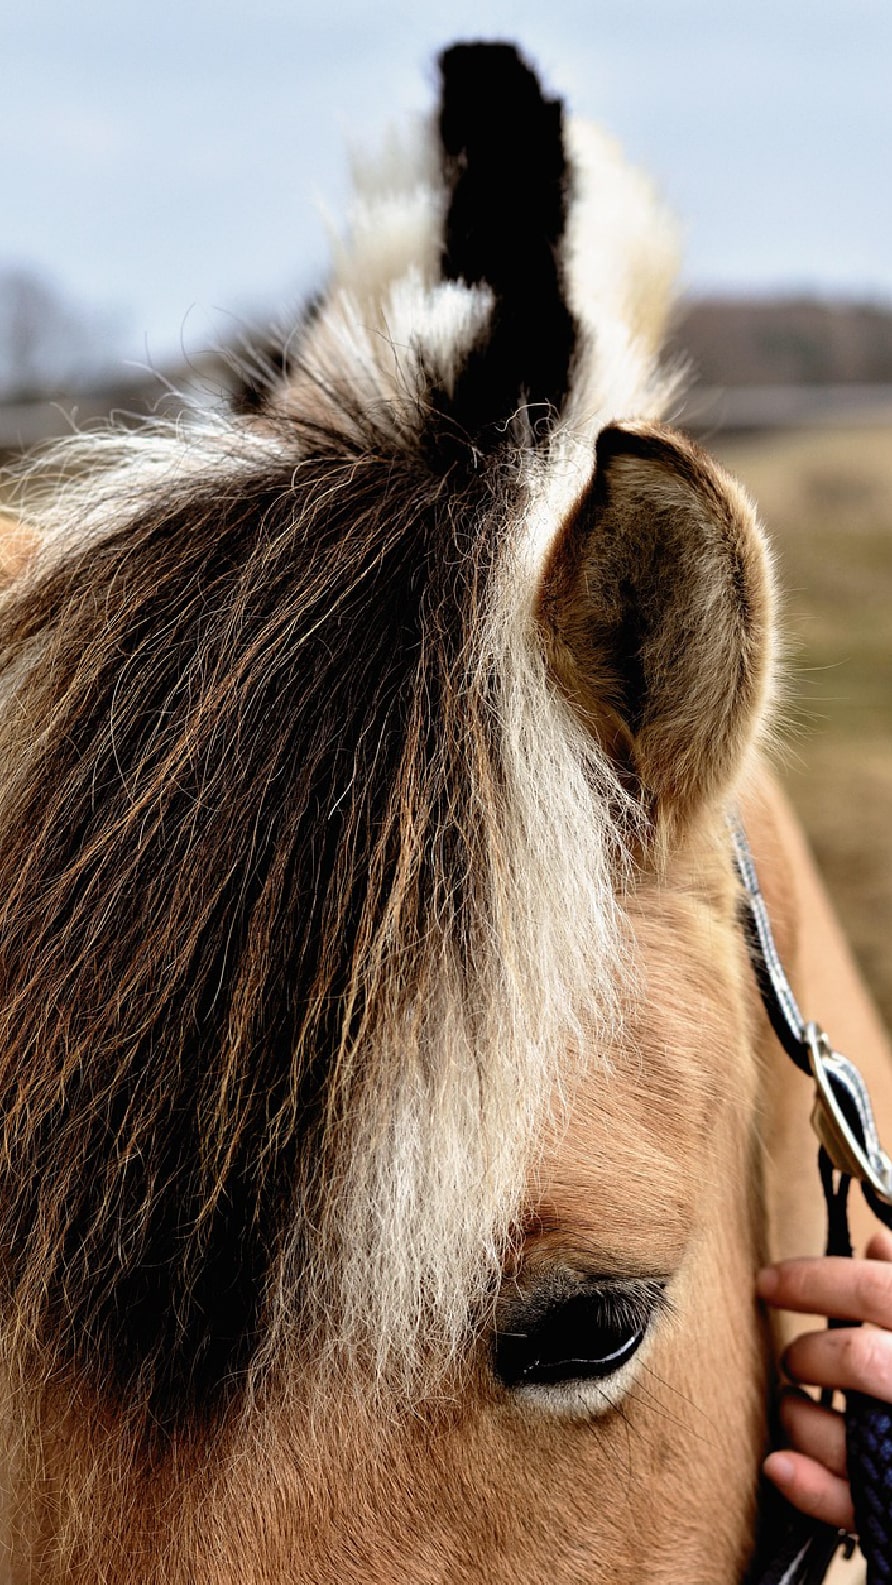 iPhone wallpapers featuring horses